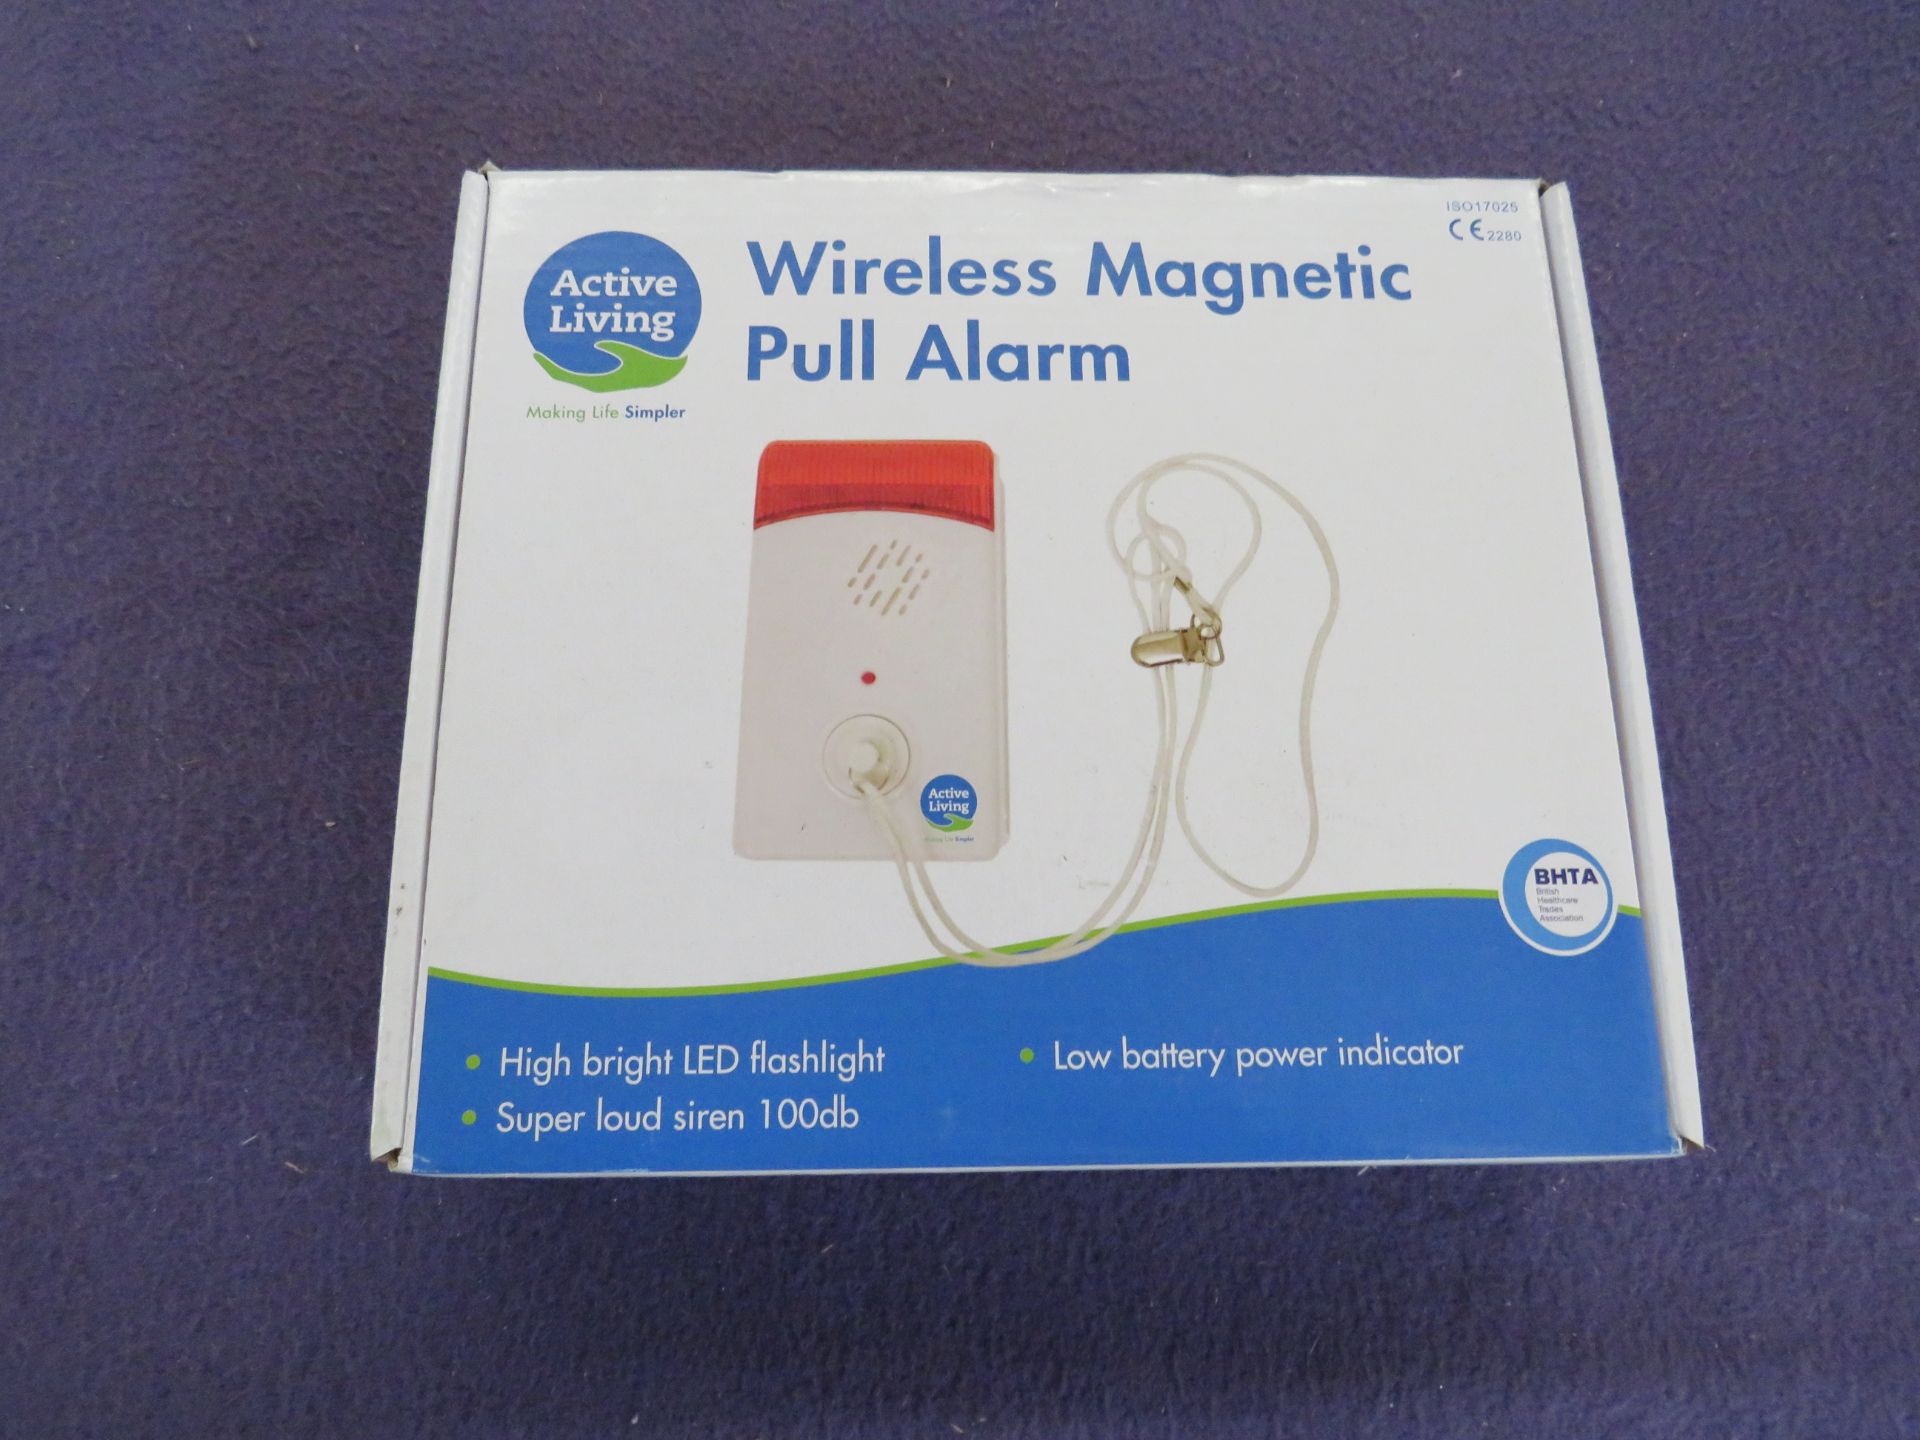 ActiveLiving - Wireless Magnetic Pull Alarm - Unchecked & Boxed.